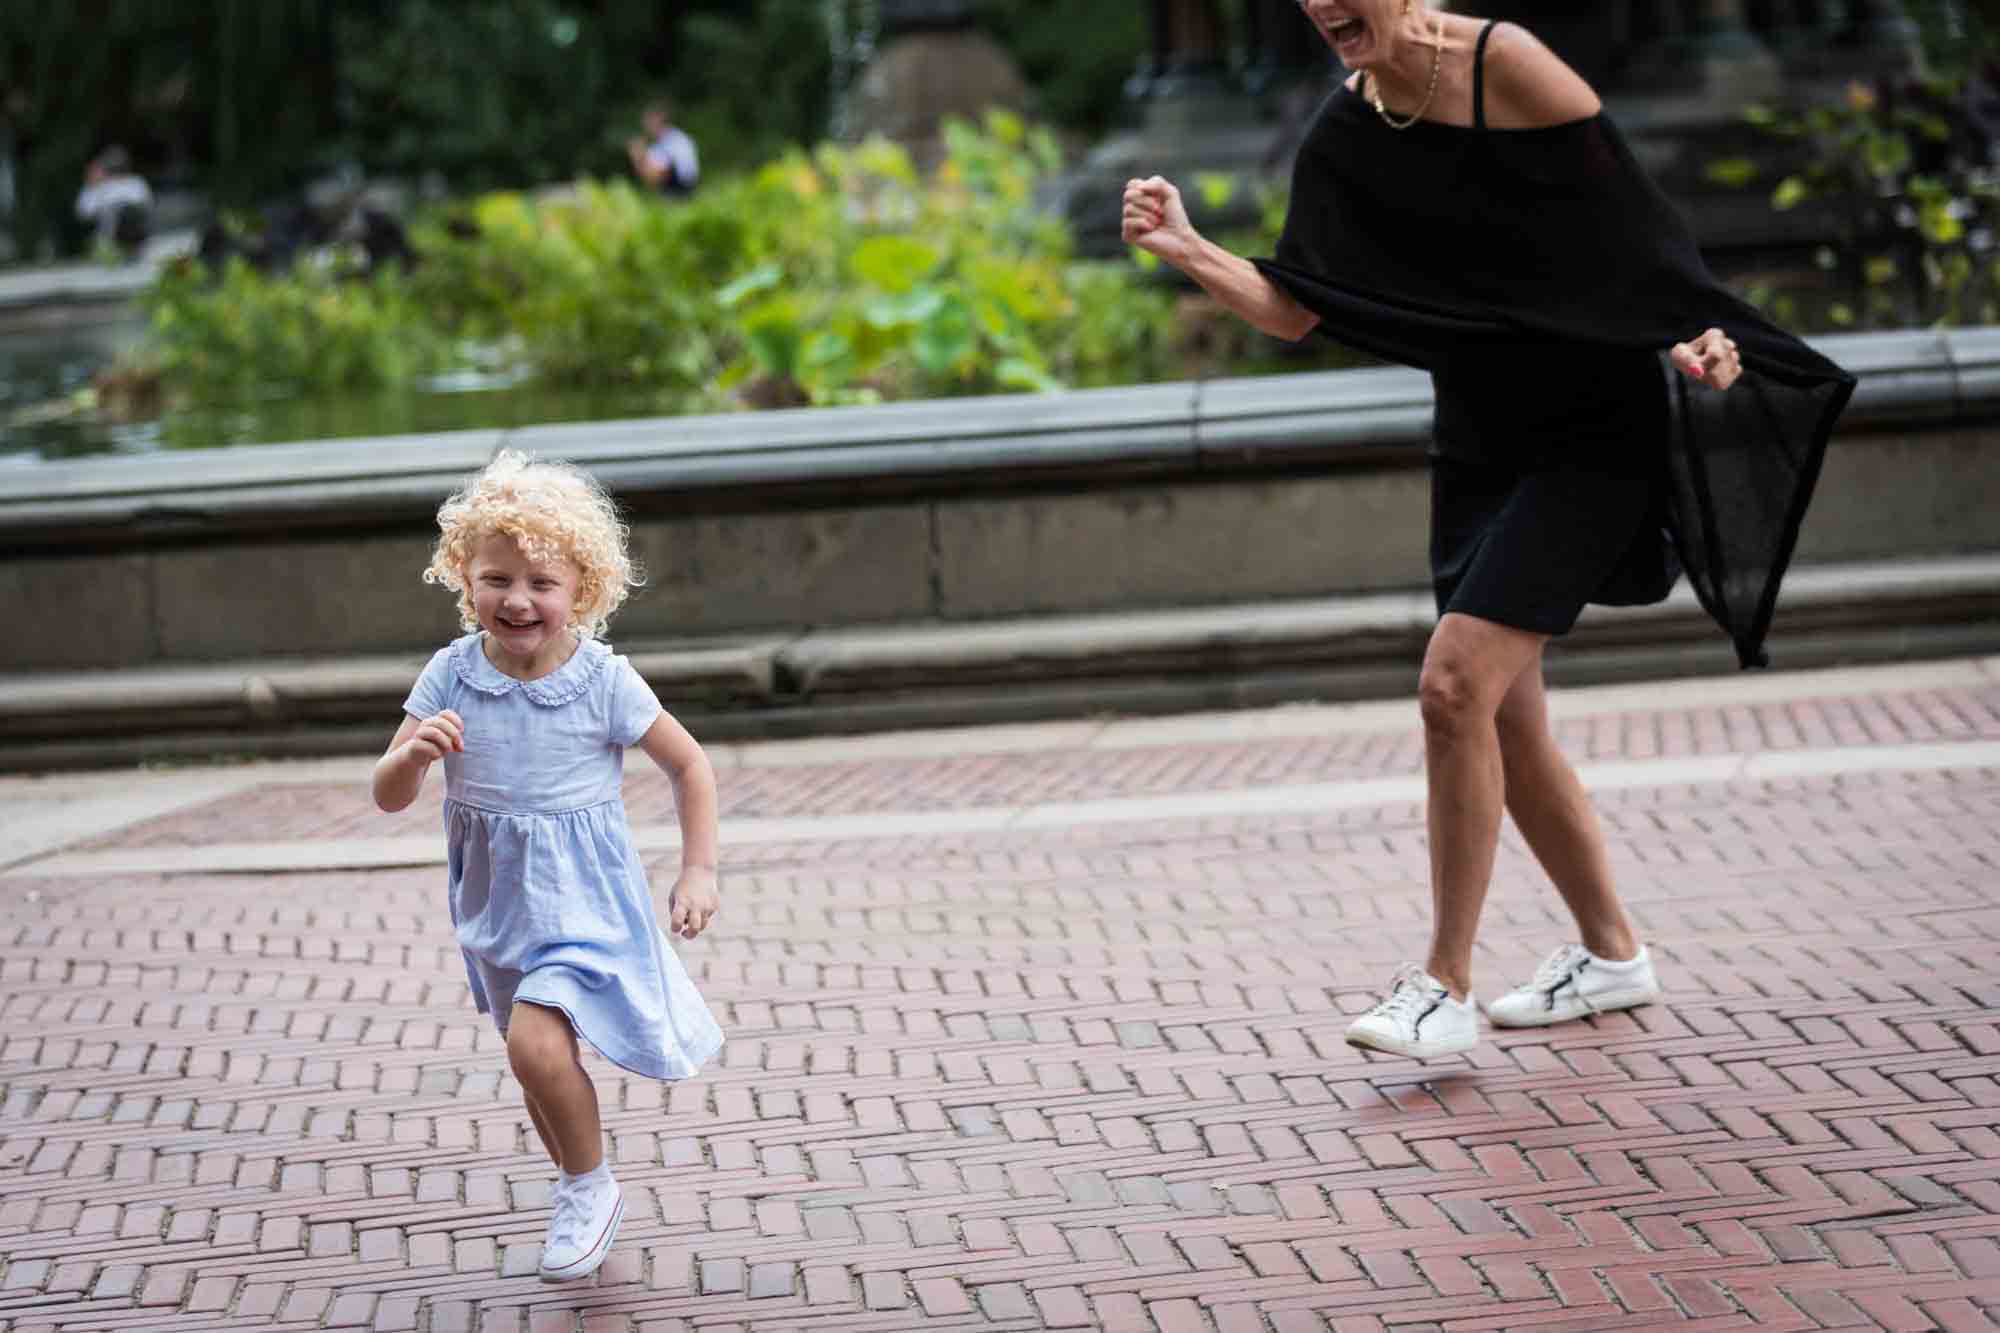 Grandmother chasing little blonde girl for an article on NYC family portrait tips for tourists